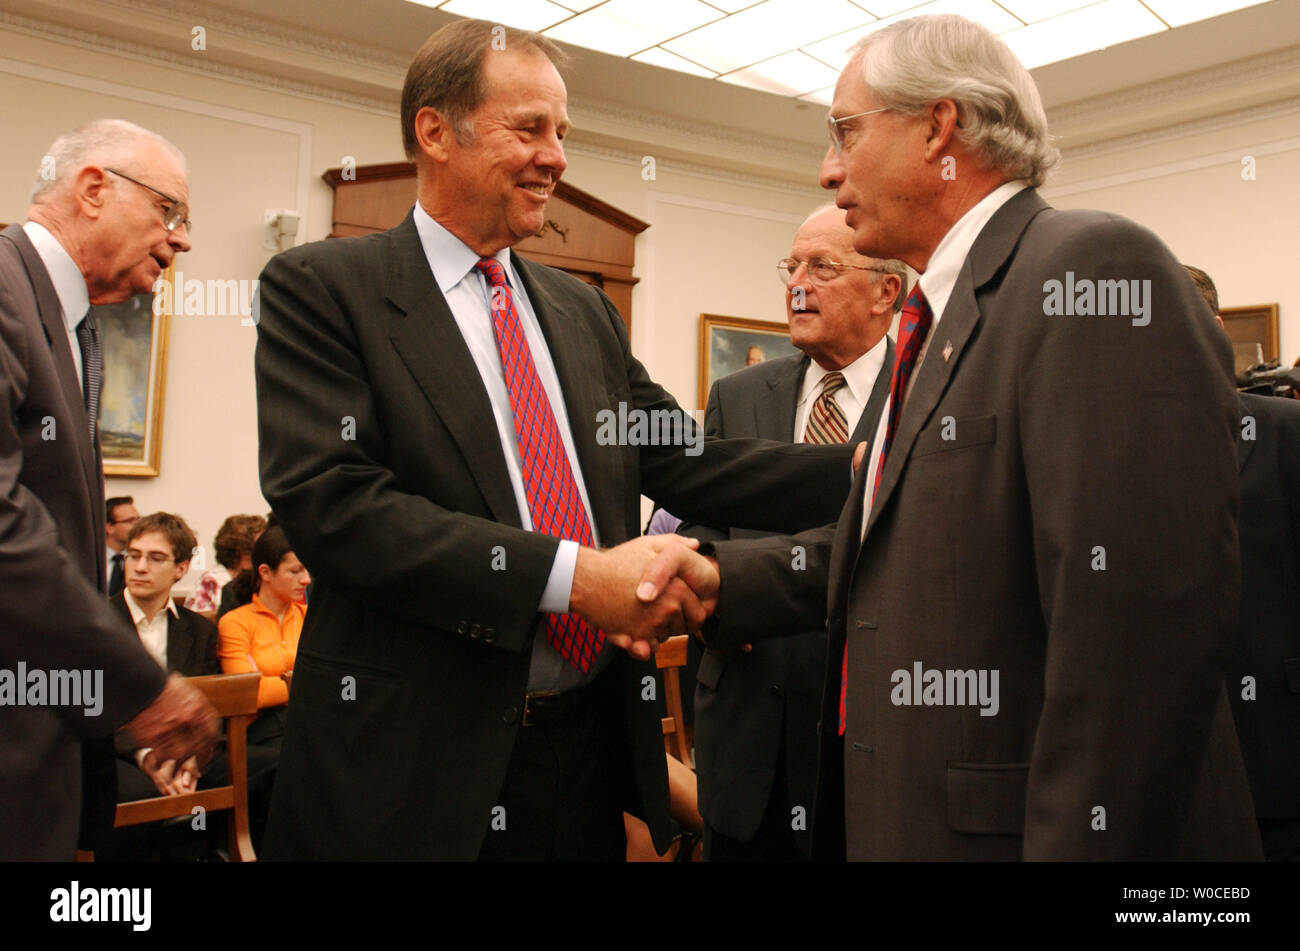 Newly nominated Director of the CIA Rep. Porter Goss, R-FL, greets 9/11 Commission Chairman Thomas Kean prior to a Full House Intelligence Committee hearing on August 11, 2004 in Washington.  The committee is examining the 9/11 Committee's recommendation to create an intelligence chief to over see all of America's intelligence services.   (UPI Photo/Michael Kleinfeld) Stock Photo